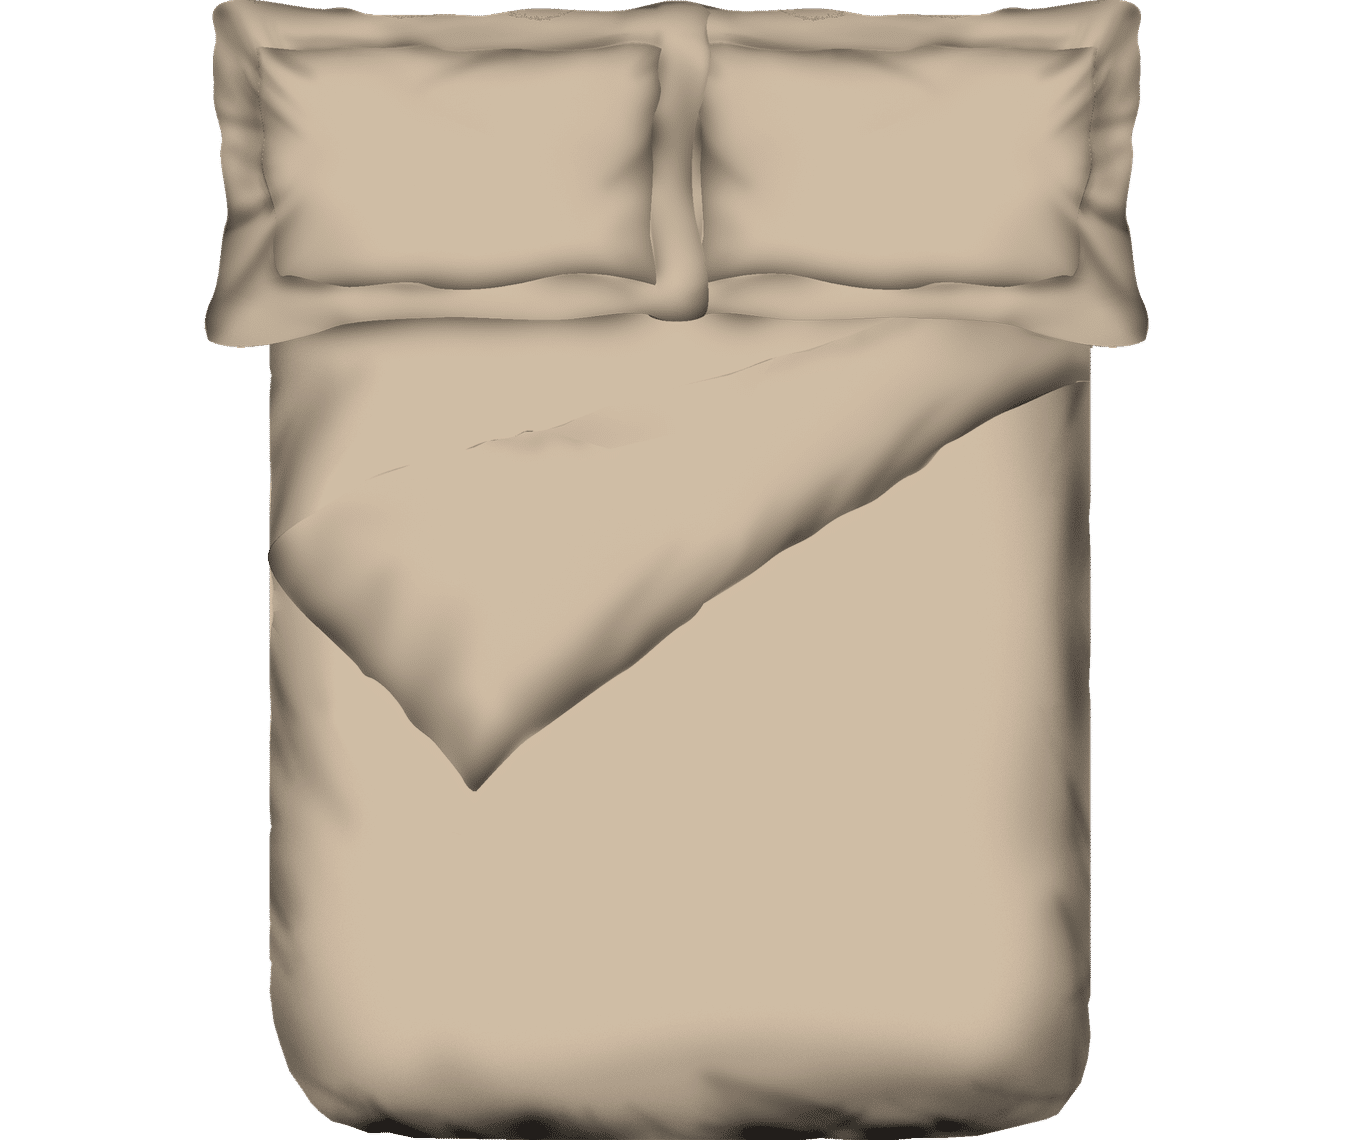 Portico New Yor Just Us Classic King Size Duvet Cover